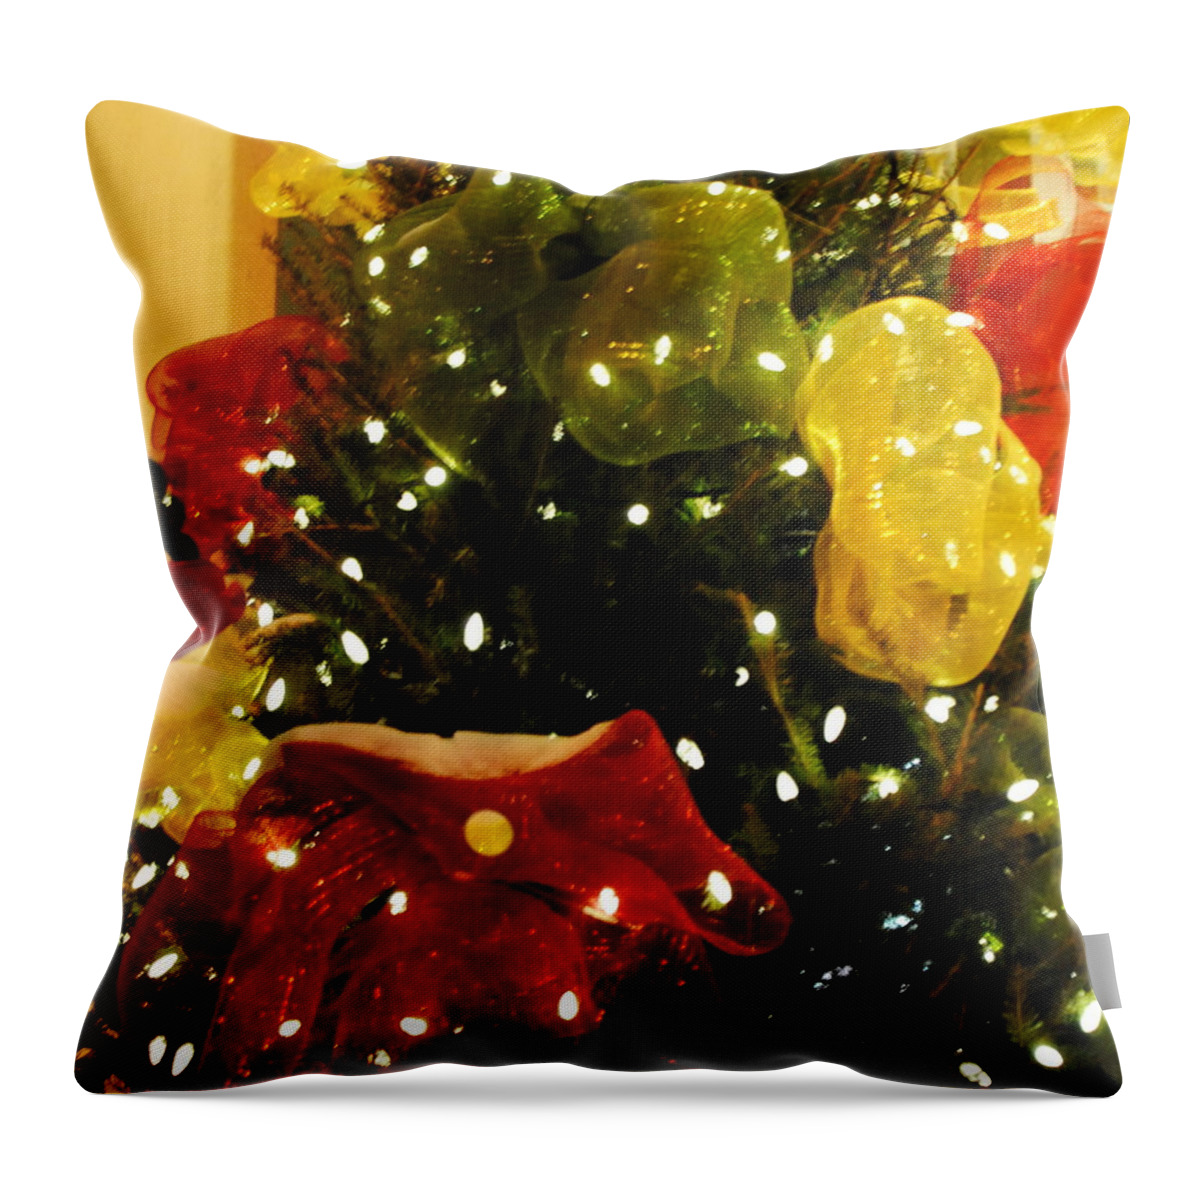 Bows Throw Pillow featuring the photograph Big Tree Bows by Jacqueline M Lewis